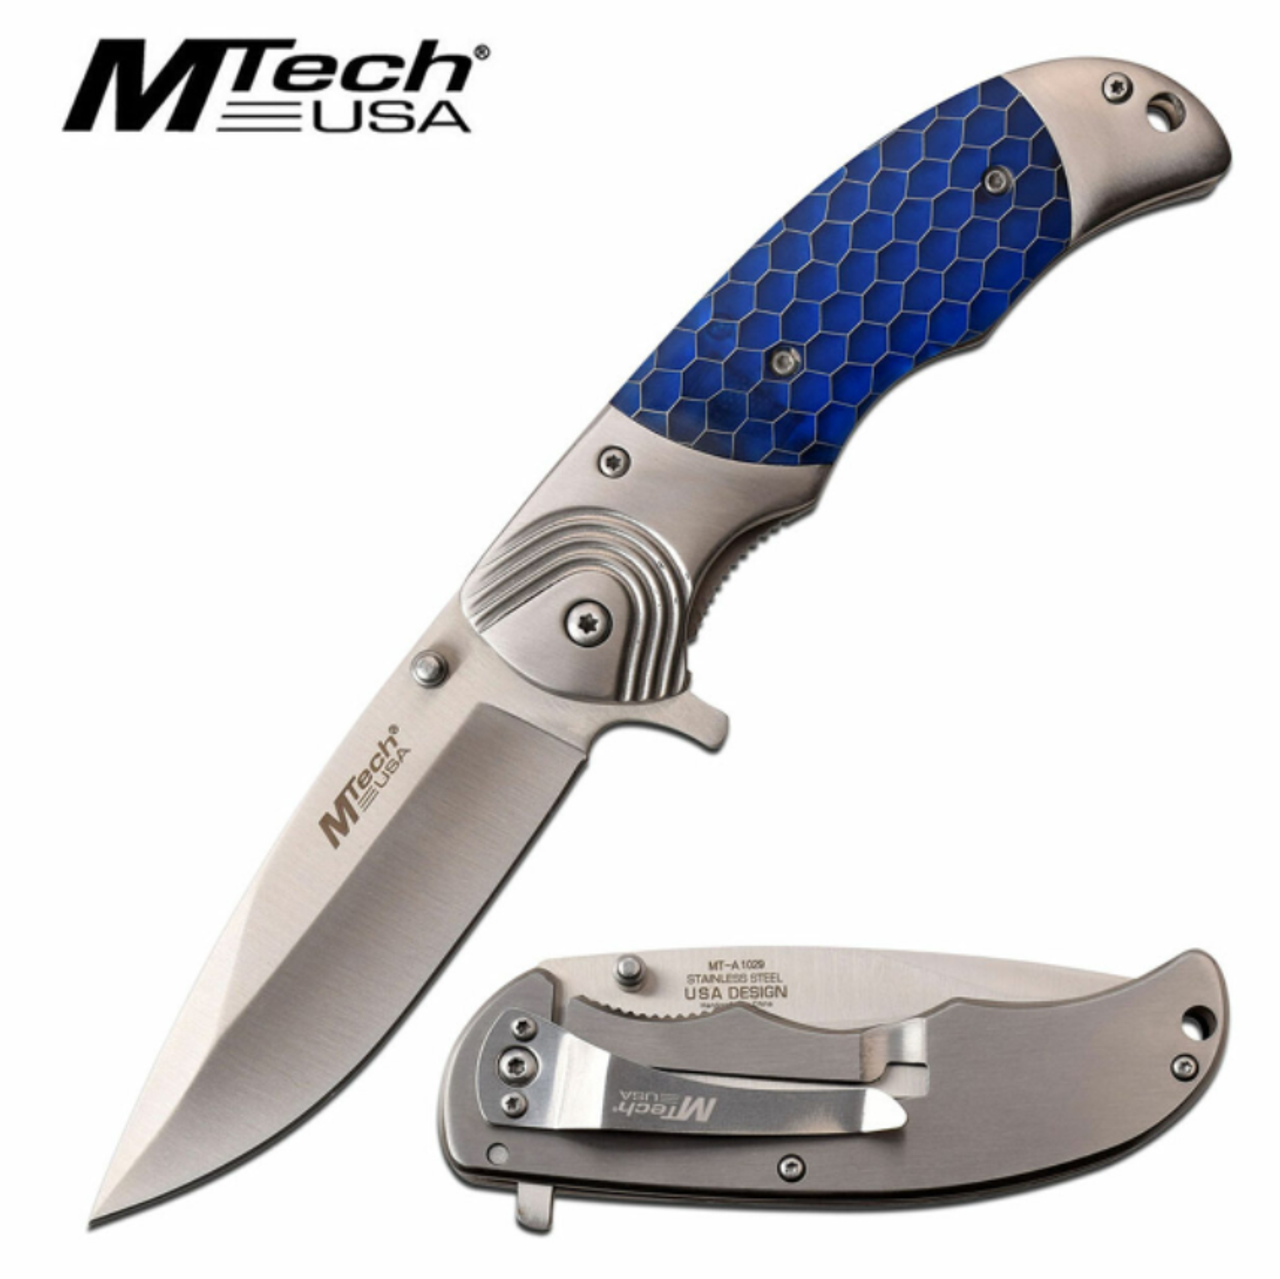 MTECH 4.5" ASSISTED STAINLESS STEEL HNDL W/ BLUE SCALES